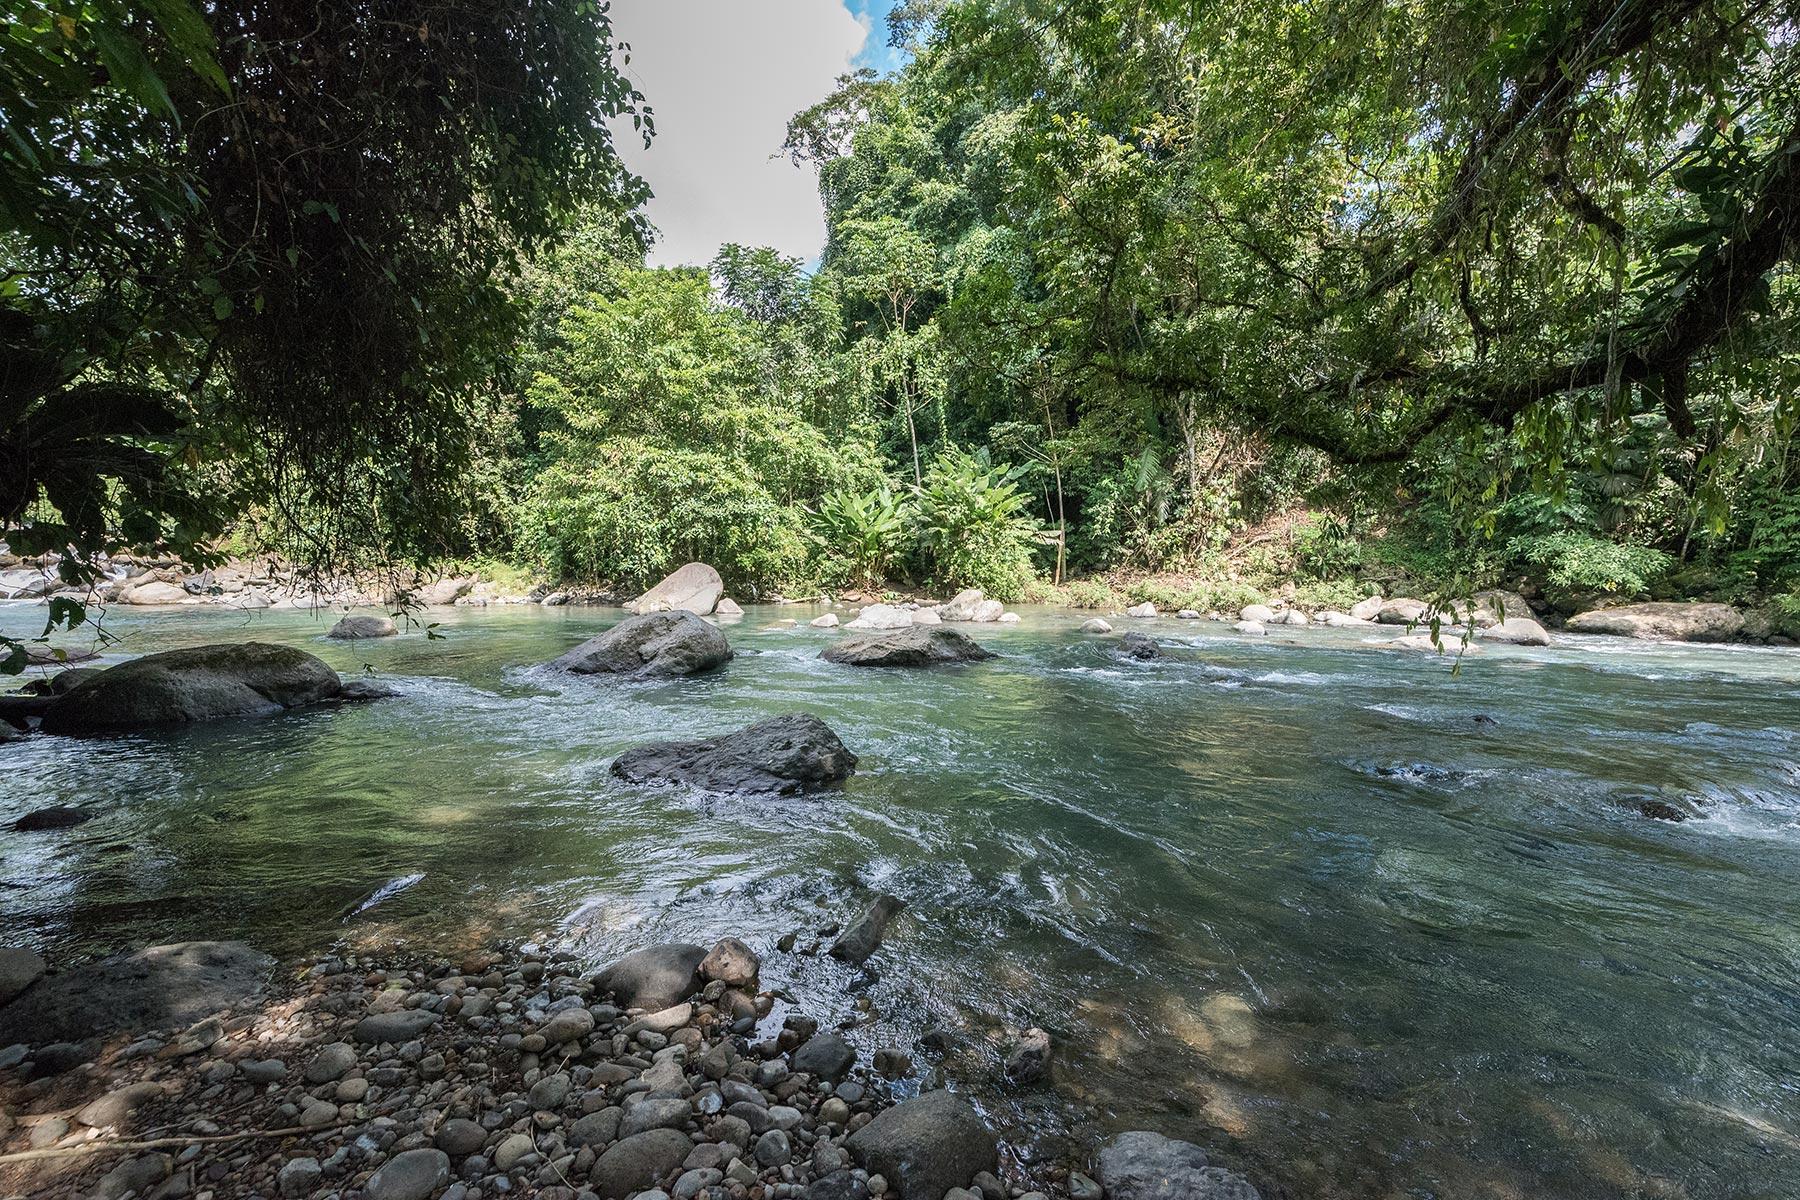 The area of San JosÃ© de LeÃ³n, MutatÃ¡, Antioquia, Colombia, is rich in clean water - a great asset, but also a threat to the community, as mining companies and other interests may enter the scene to exploit or damage the natural resource. Photo: LWF/Albin Hillert